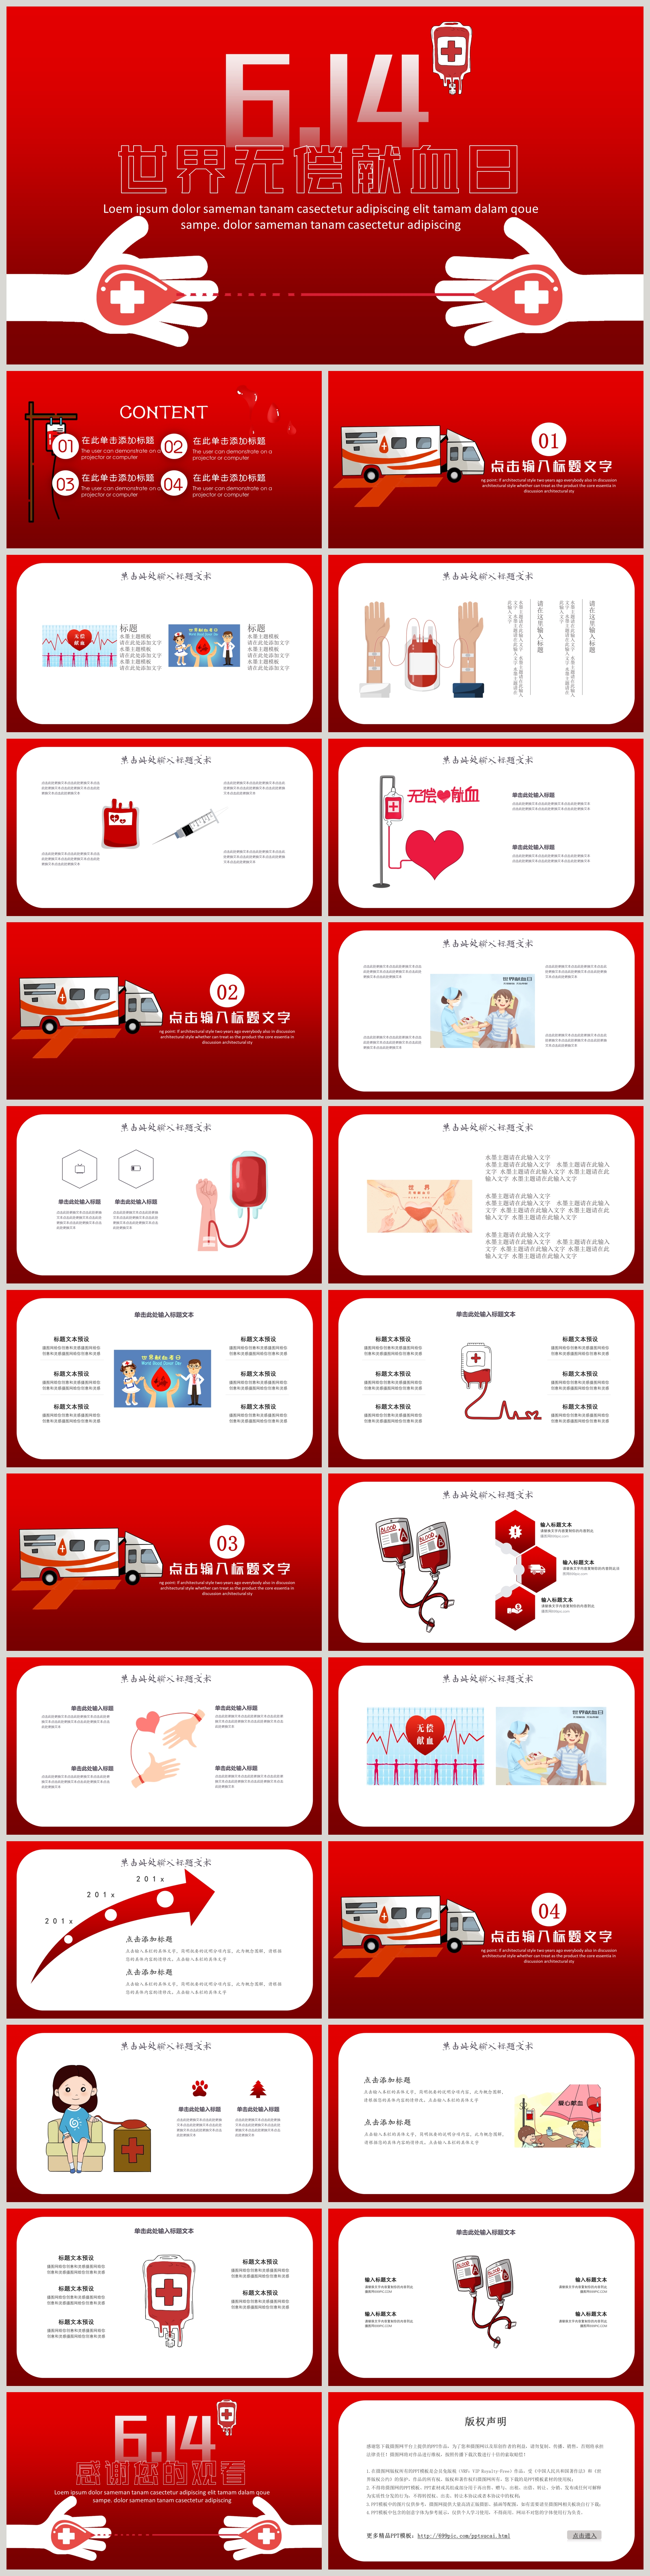 614-world-blood-donation-day-ppt-template-powerpoint-templete-ppt-free